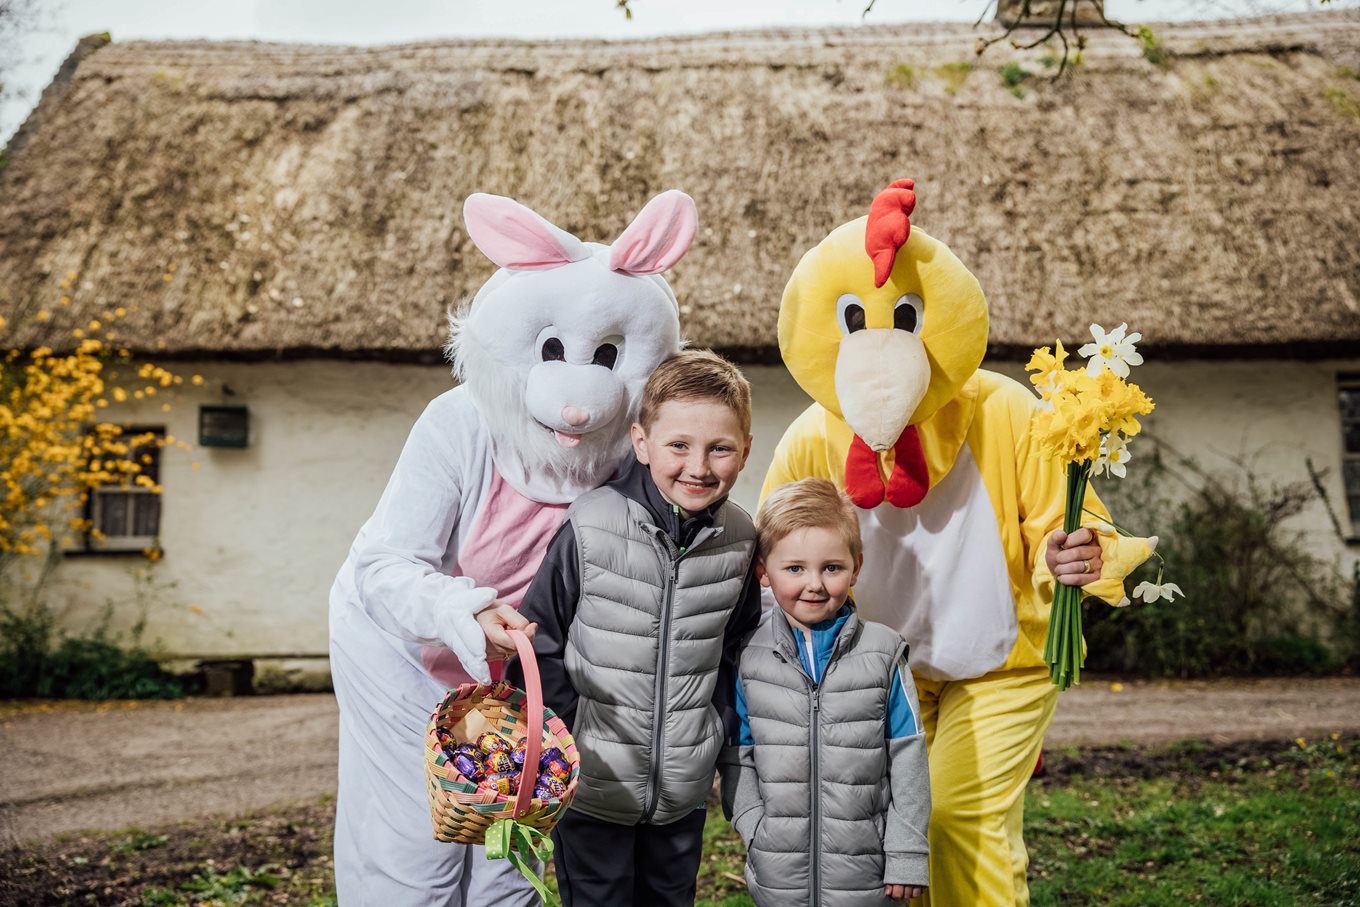 Whirlwind weekend of egg-citement at Bunratty Castle & Folk Park this Easter